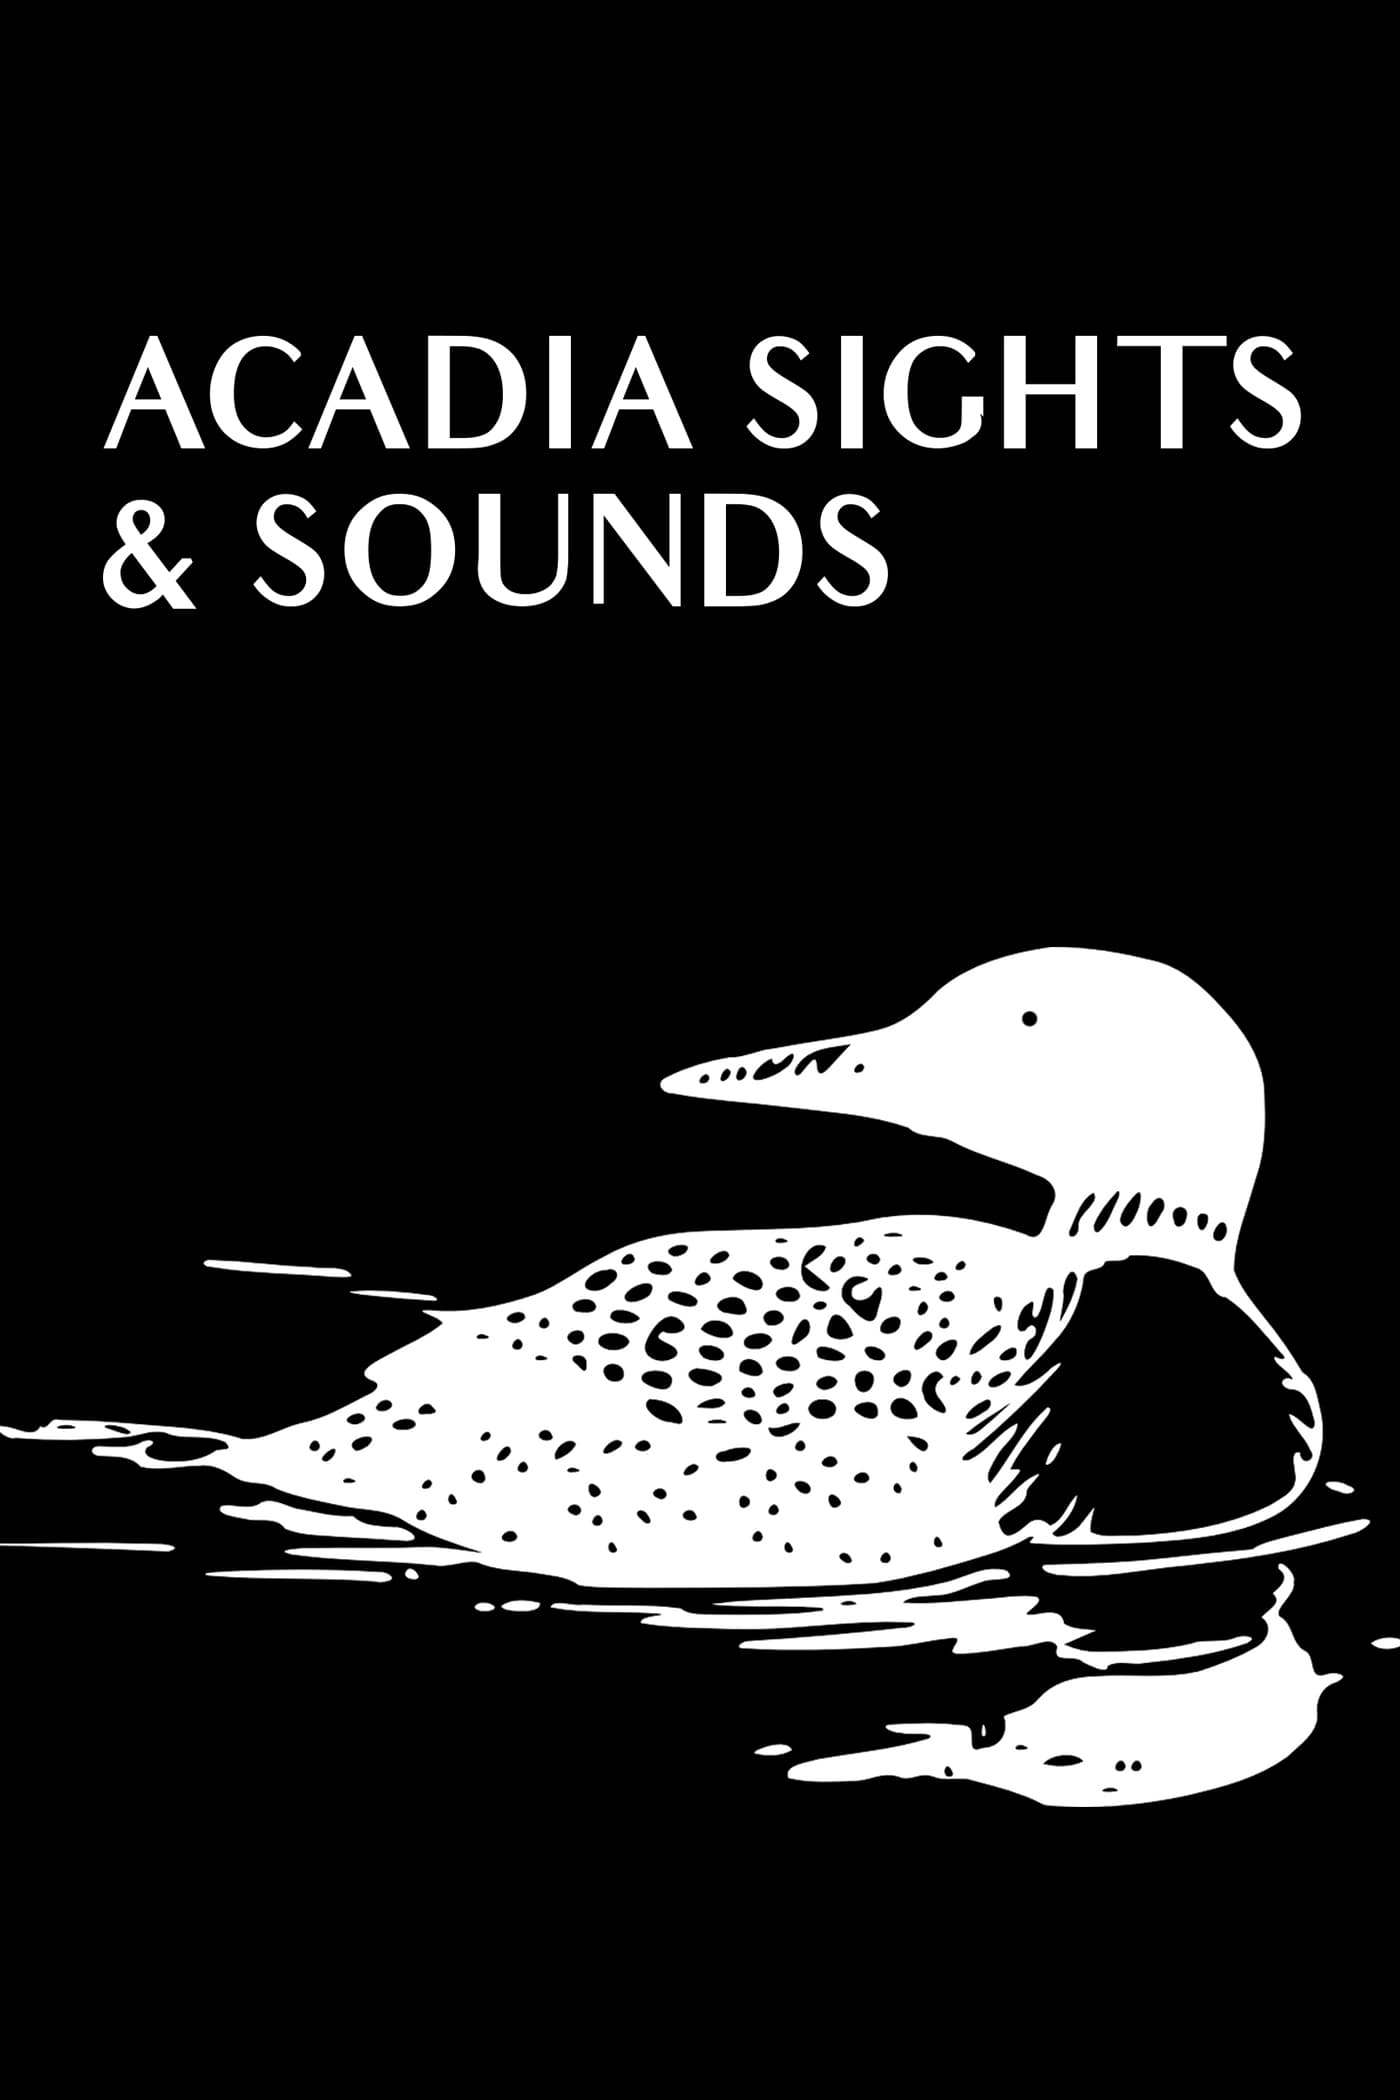 Acadia Sights & Sounds